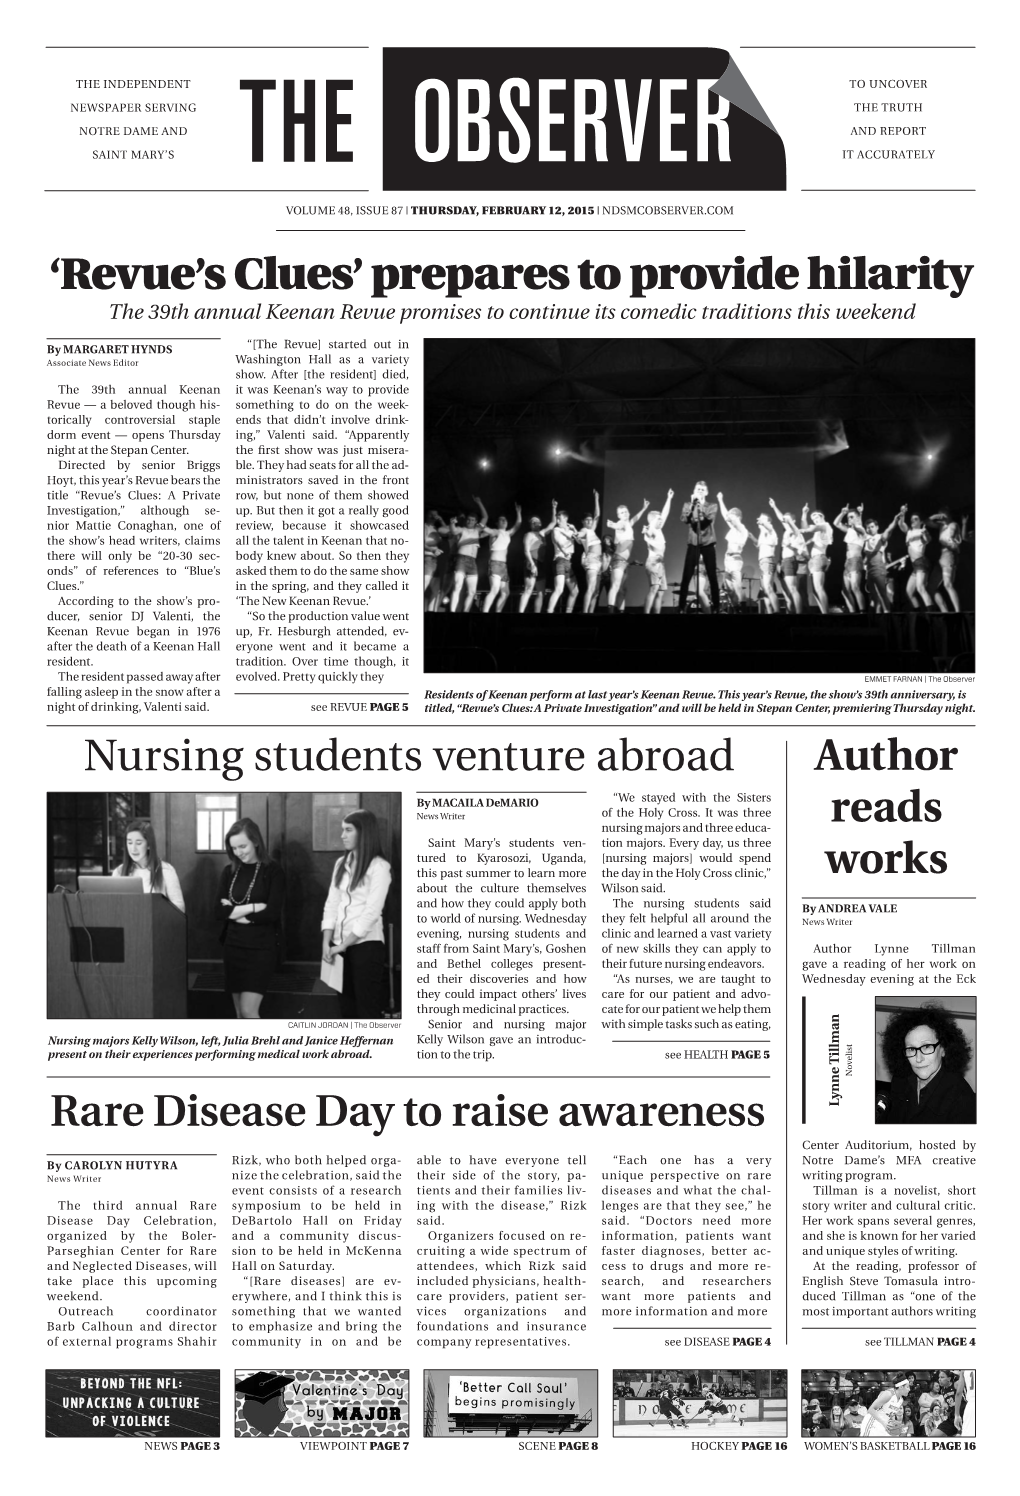 'Revue's Clues' Prepares to Provide Hilarity Nursing Students Venture Abroad Rare Disease Day to Raise Awareness Author Re